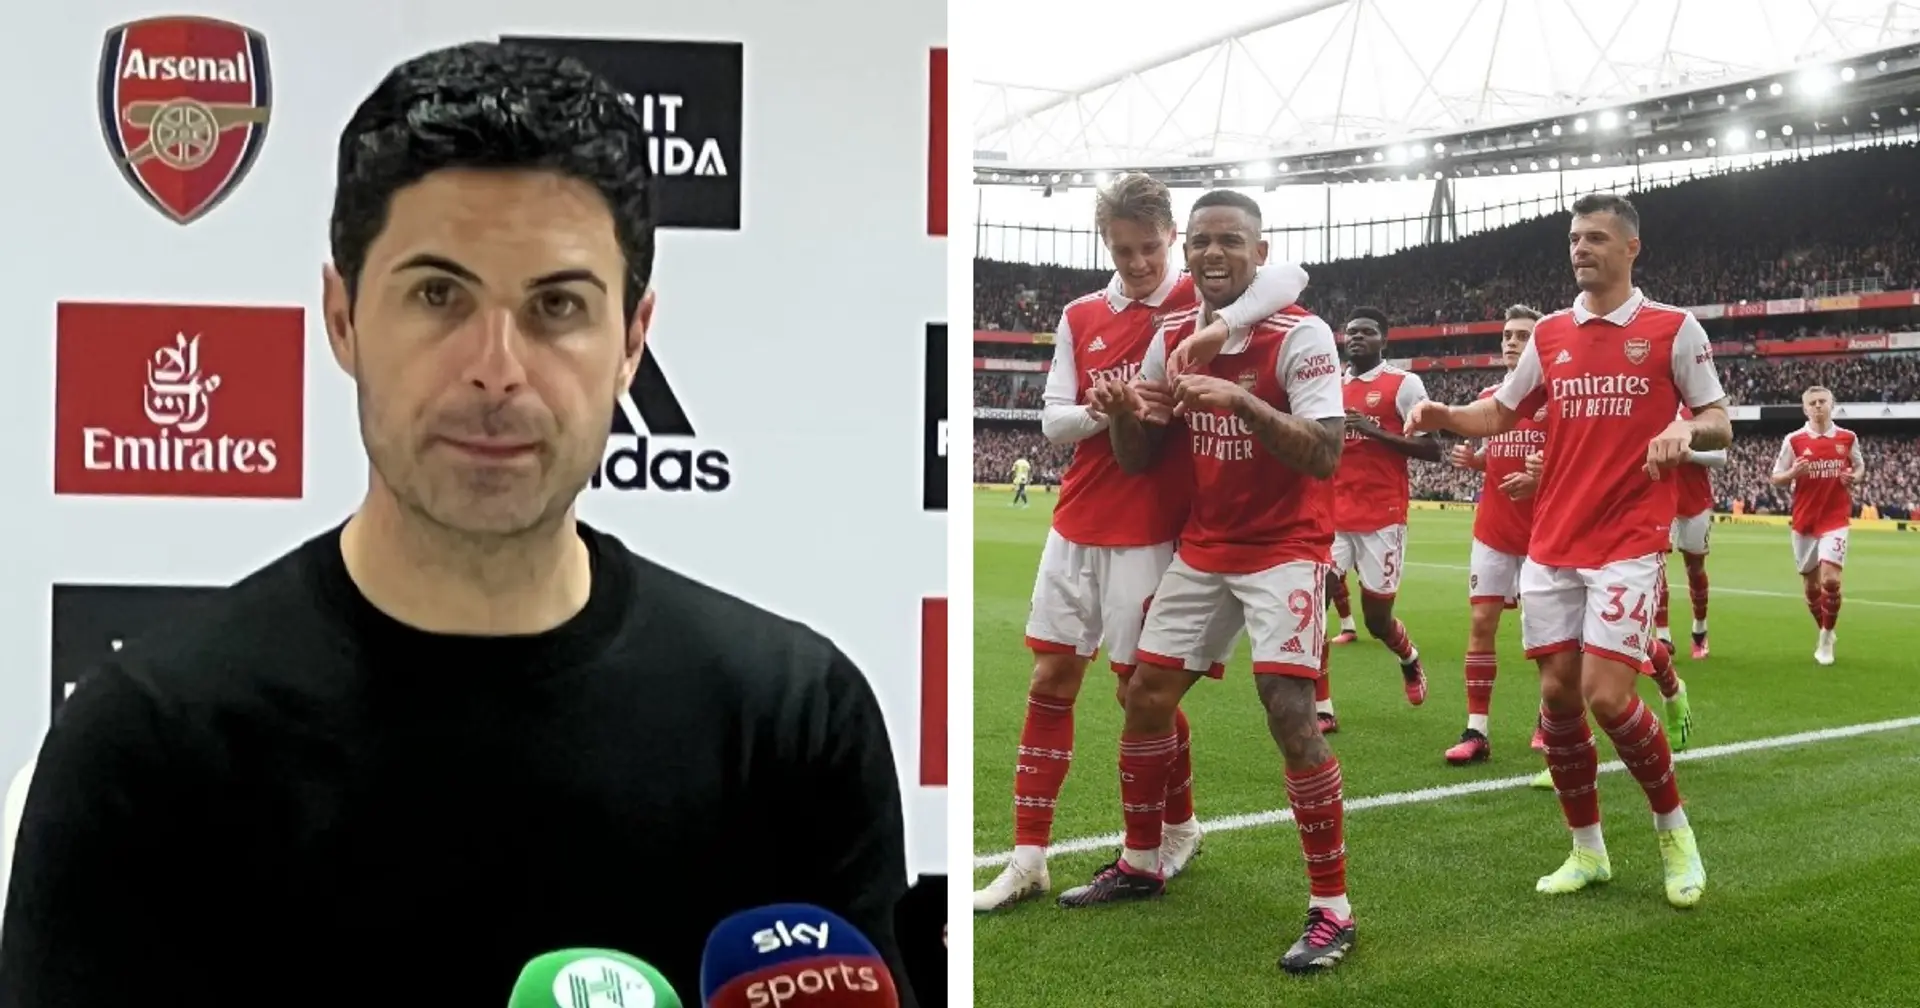 Mikel Arteta: 'We have to find a way to keep winning and keep performing'